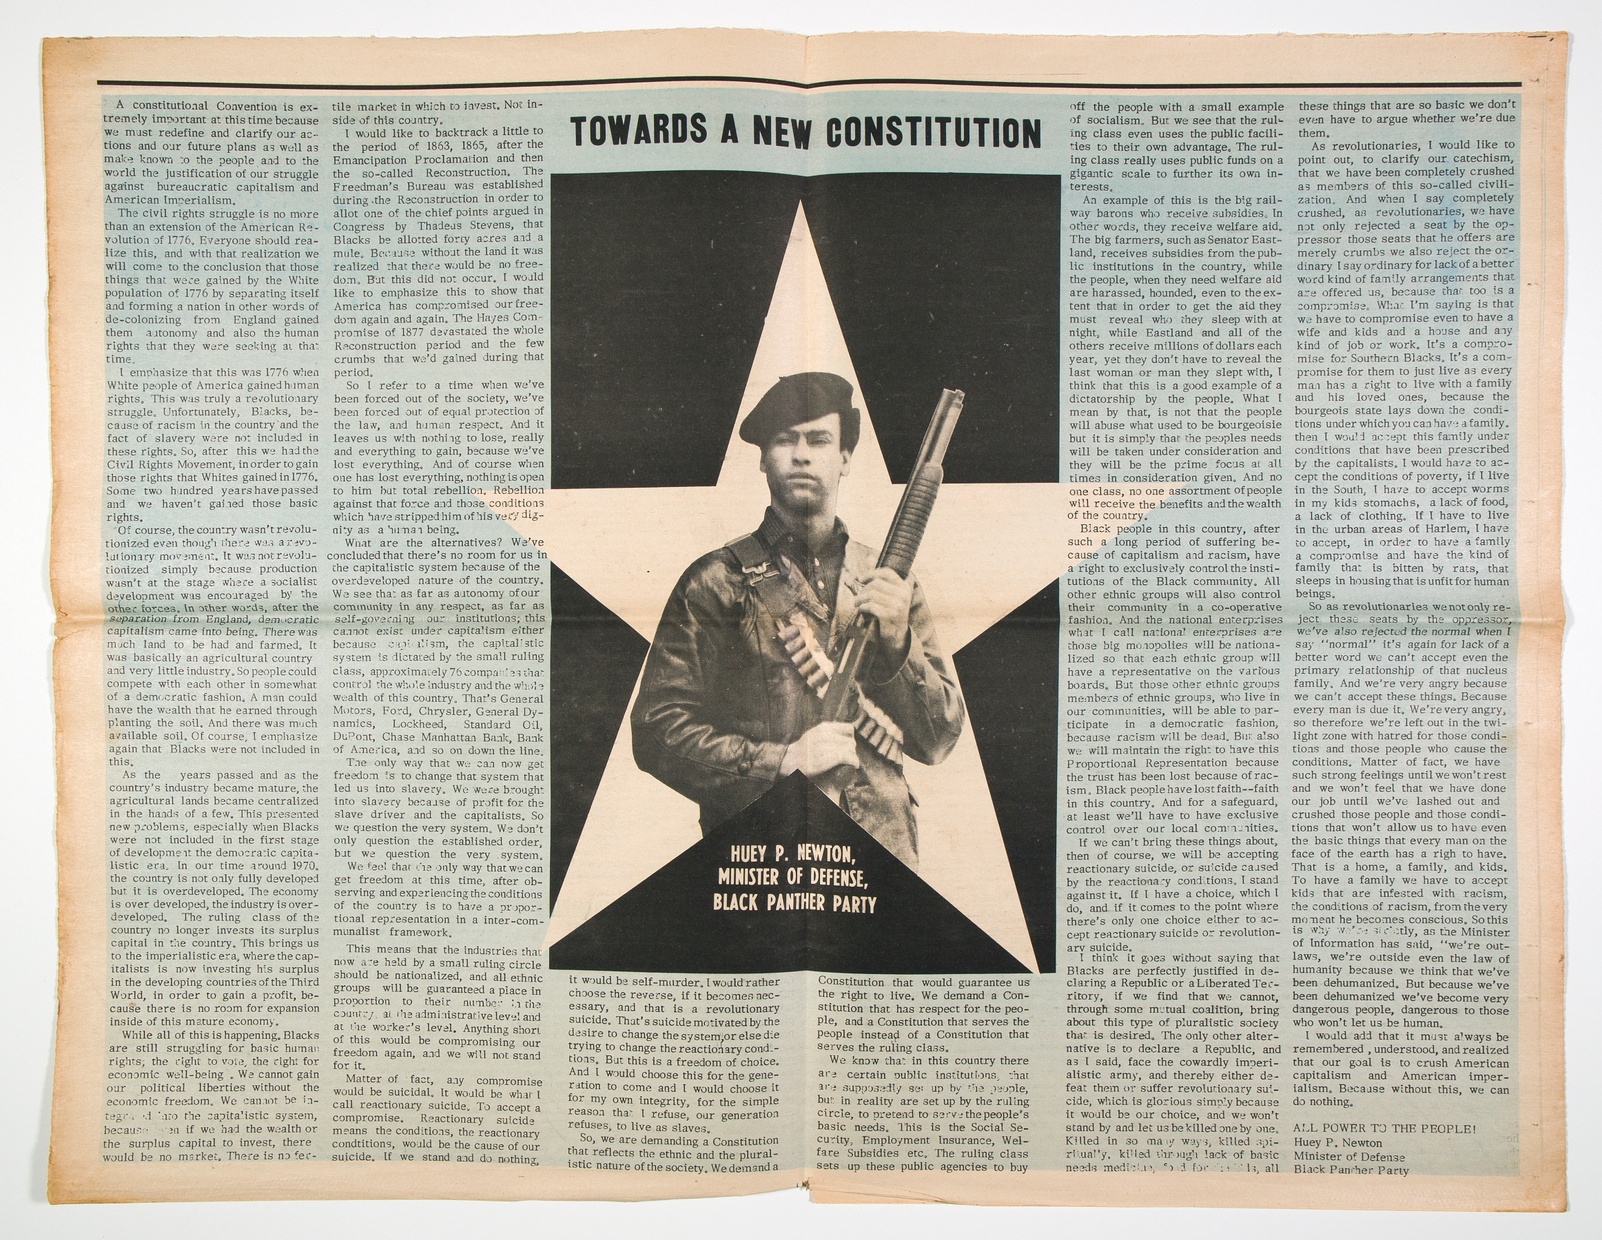 _Towards A New Constitution_ from _The Black Panther_ Vol. V No. 22, Saturday, November 28, 1970, ink on newsprint, 17 ½ x 23 ¾ inches, Tang Teaching Museum collection, 2021.2.1 